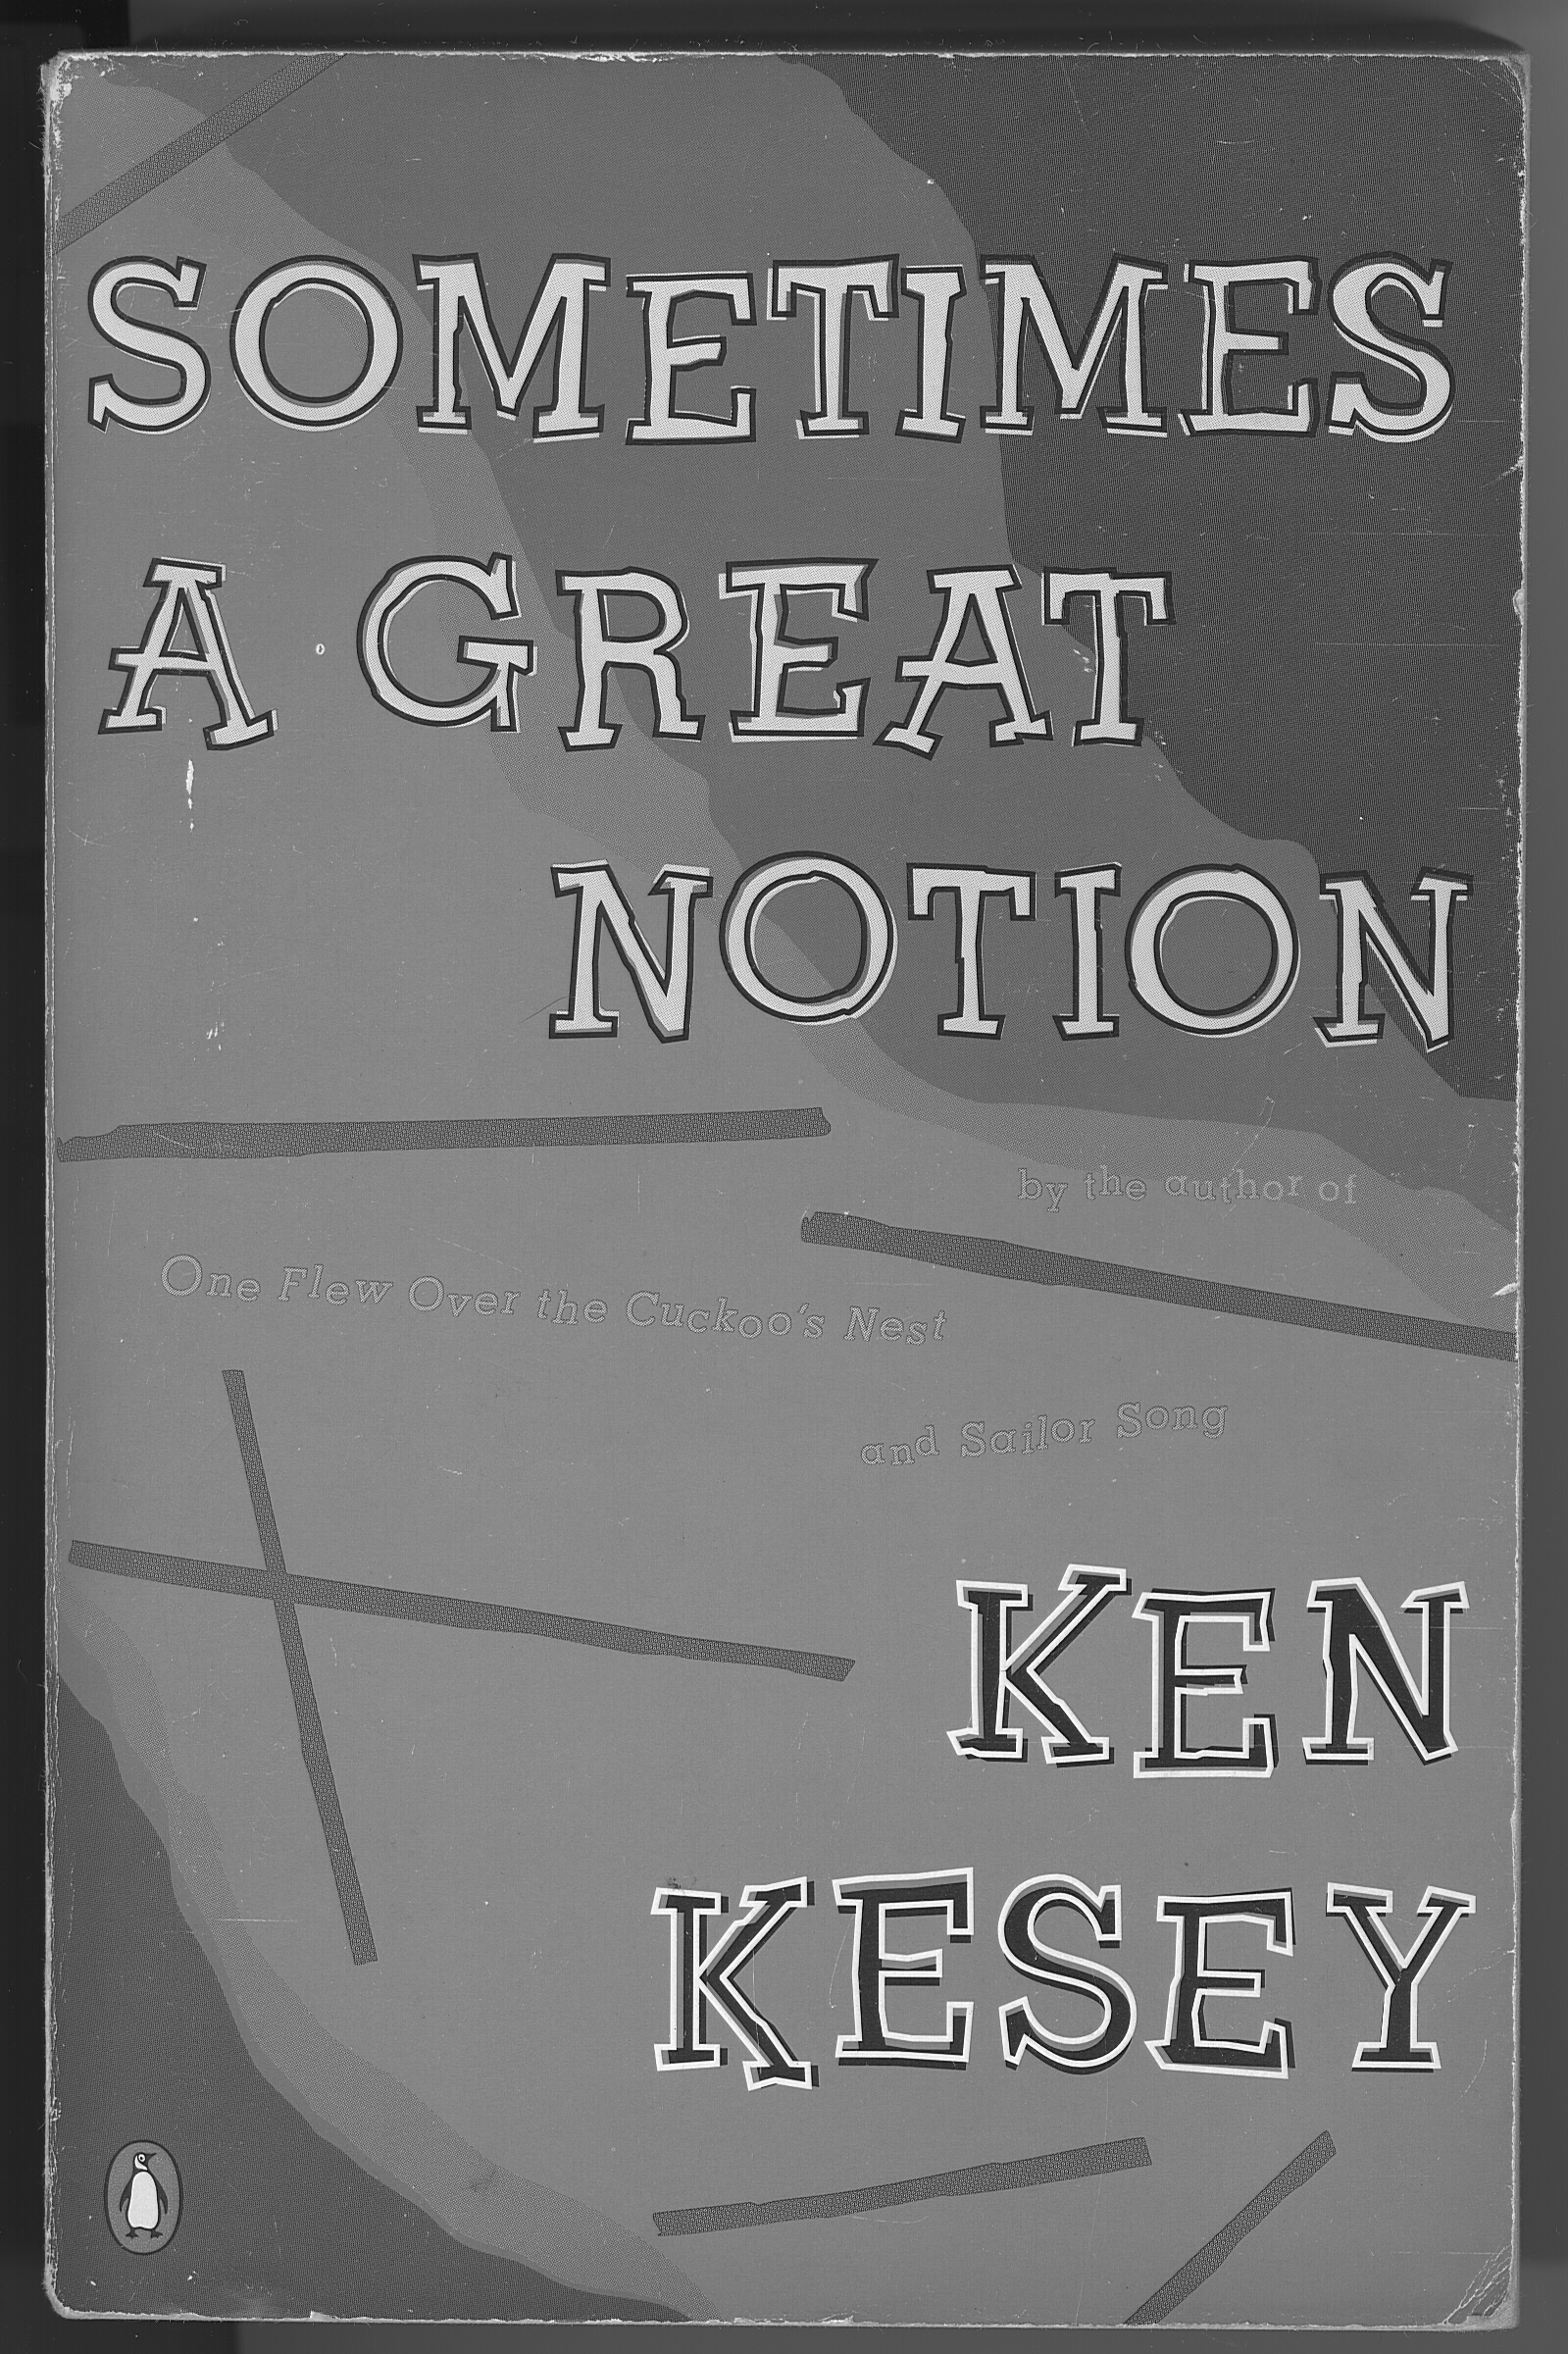 Image of the cover of the book, Sometimes a Great Notion, by Ken Kesey. The cover has different 